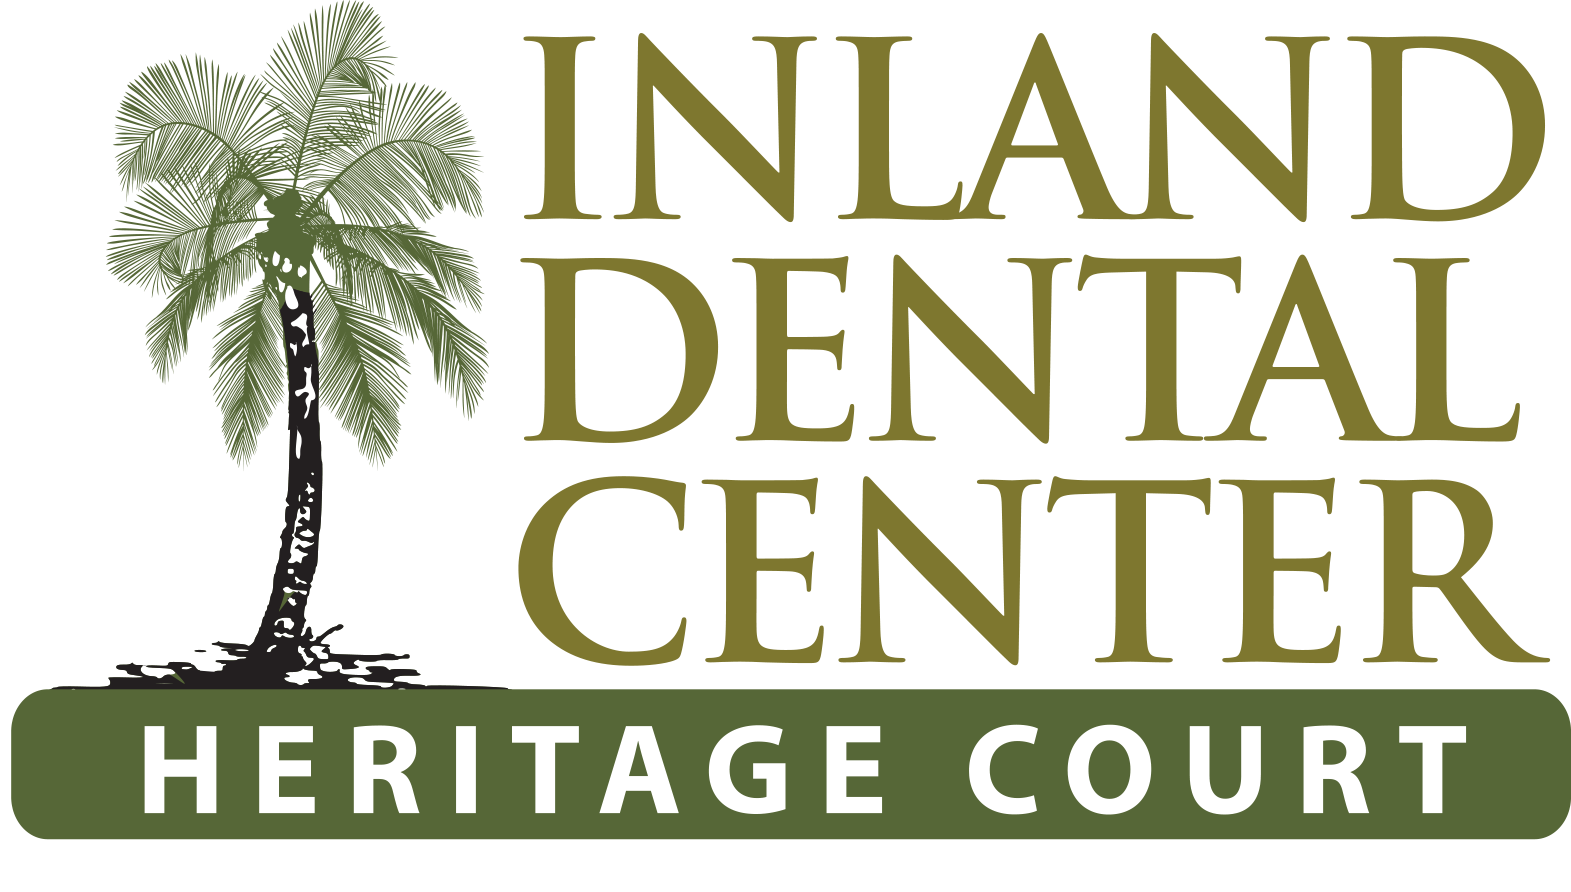 Link to Inland Dental Center - Heritage Court home page